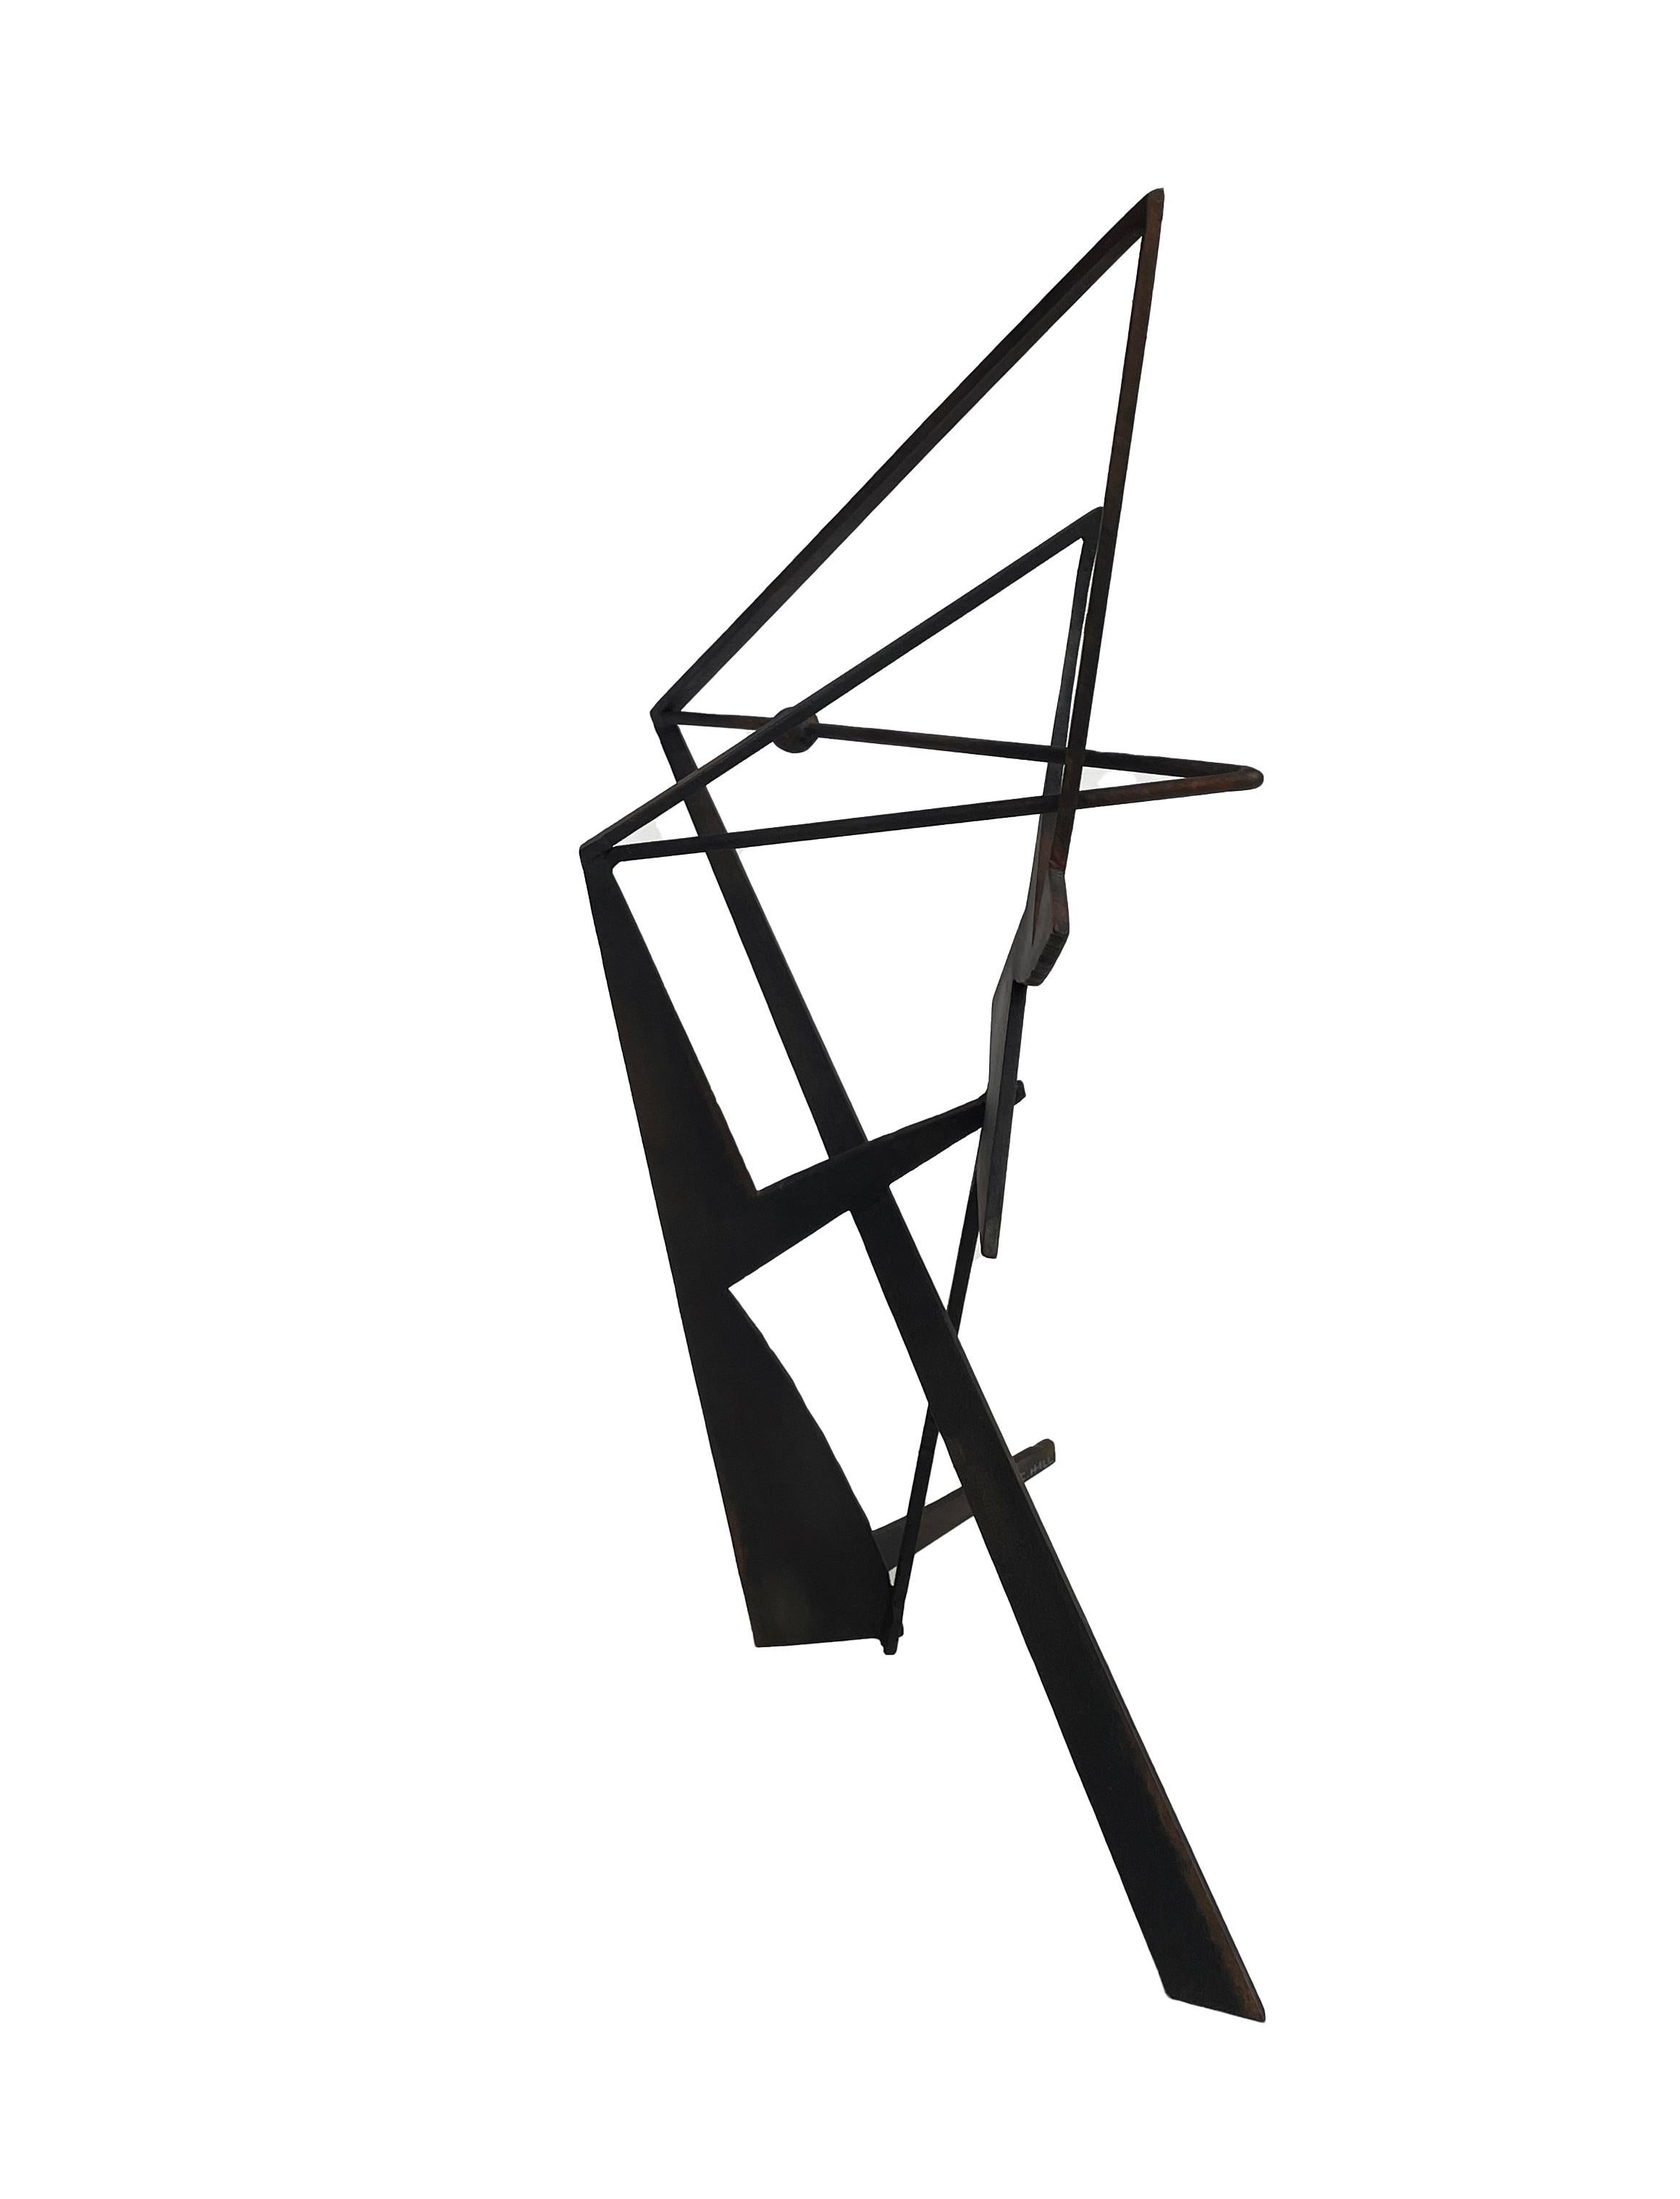 The Shortest Distance - Abstract Geometric Form, Welded Steel Sculpture  2